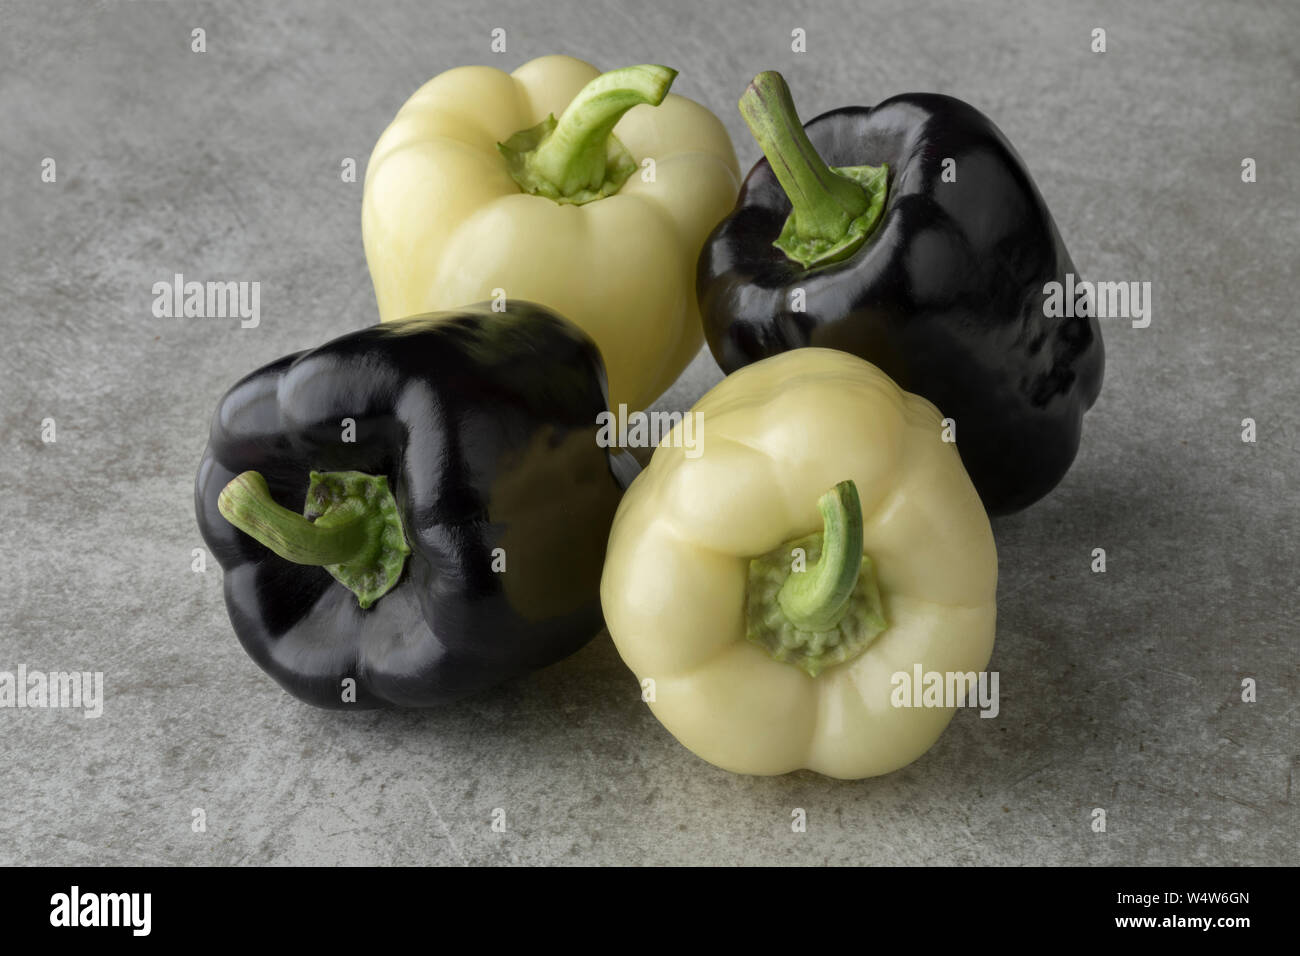 Fresh raw purple and white bell peppers Stock Photo